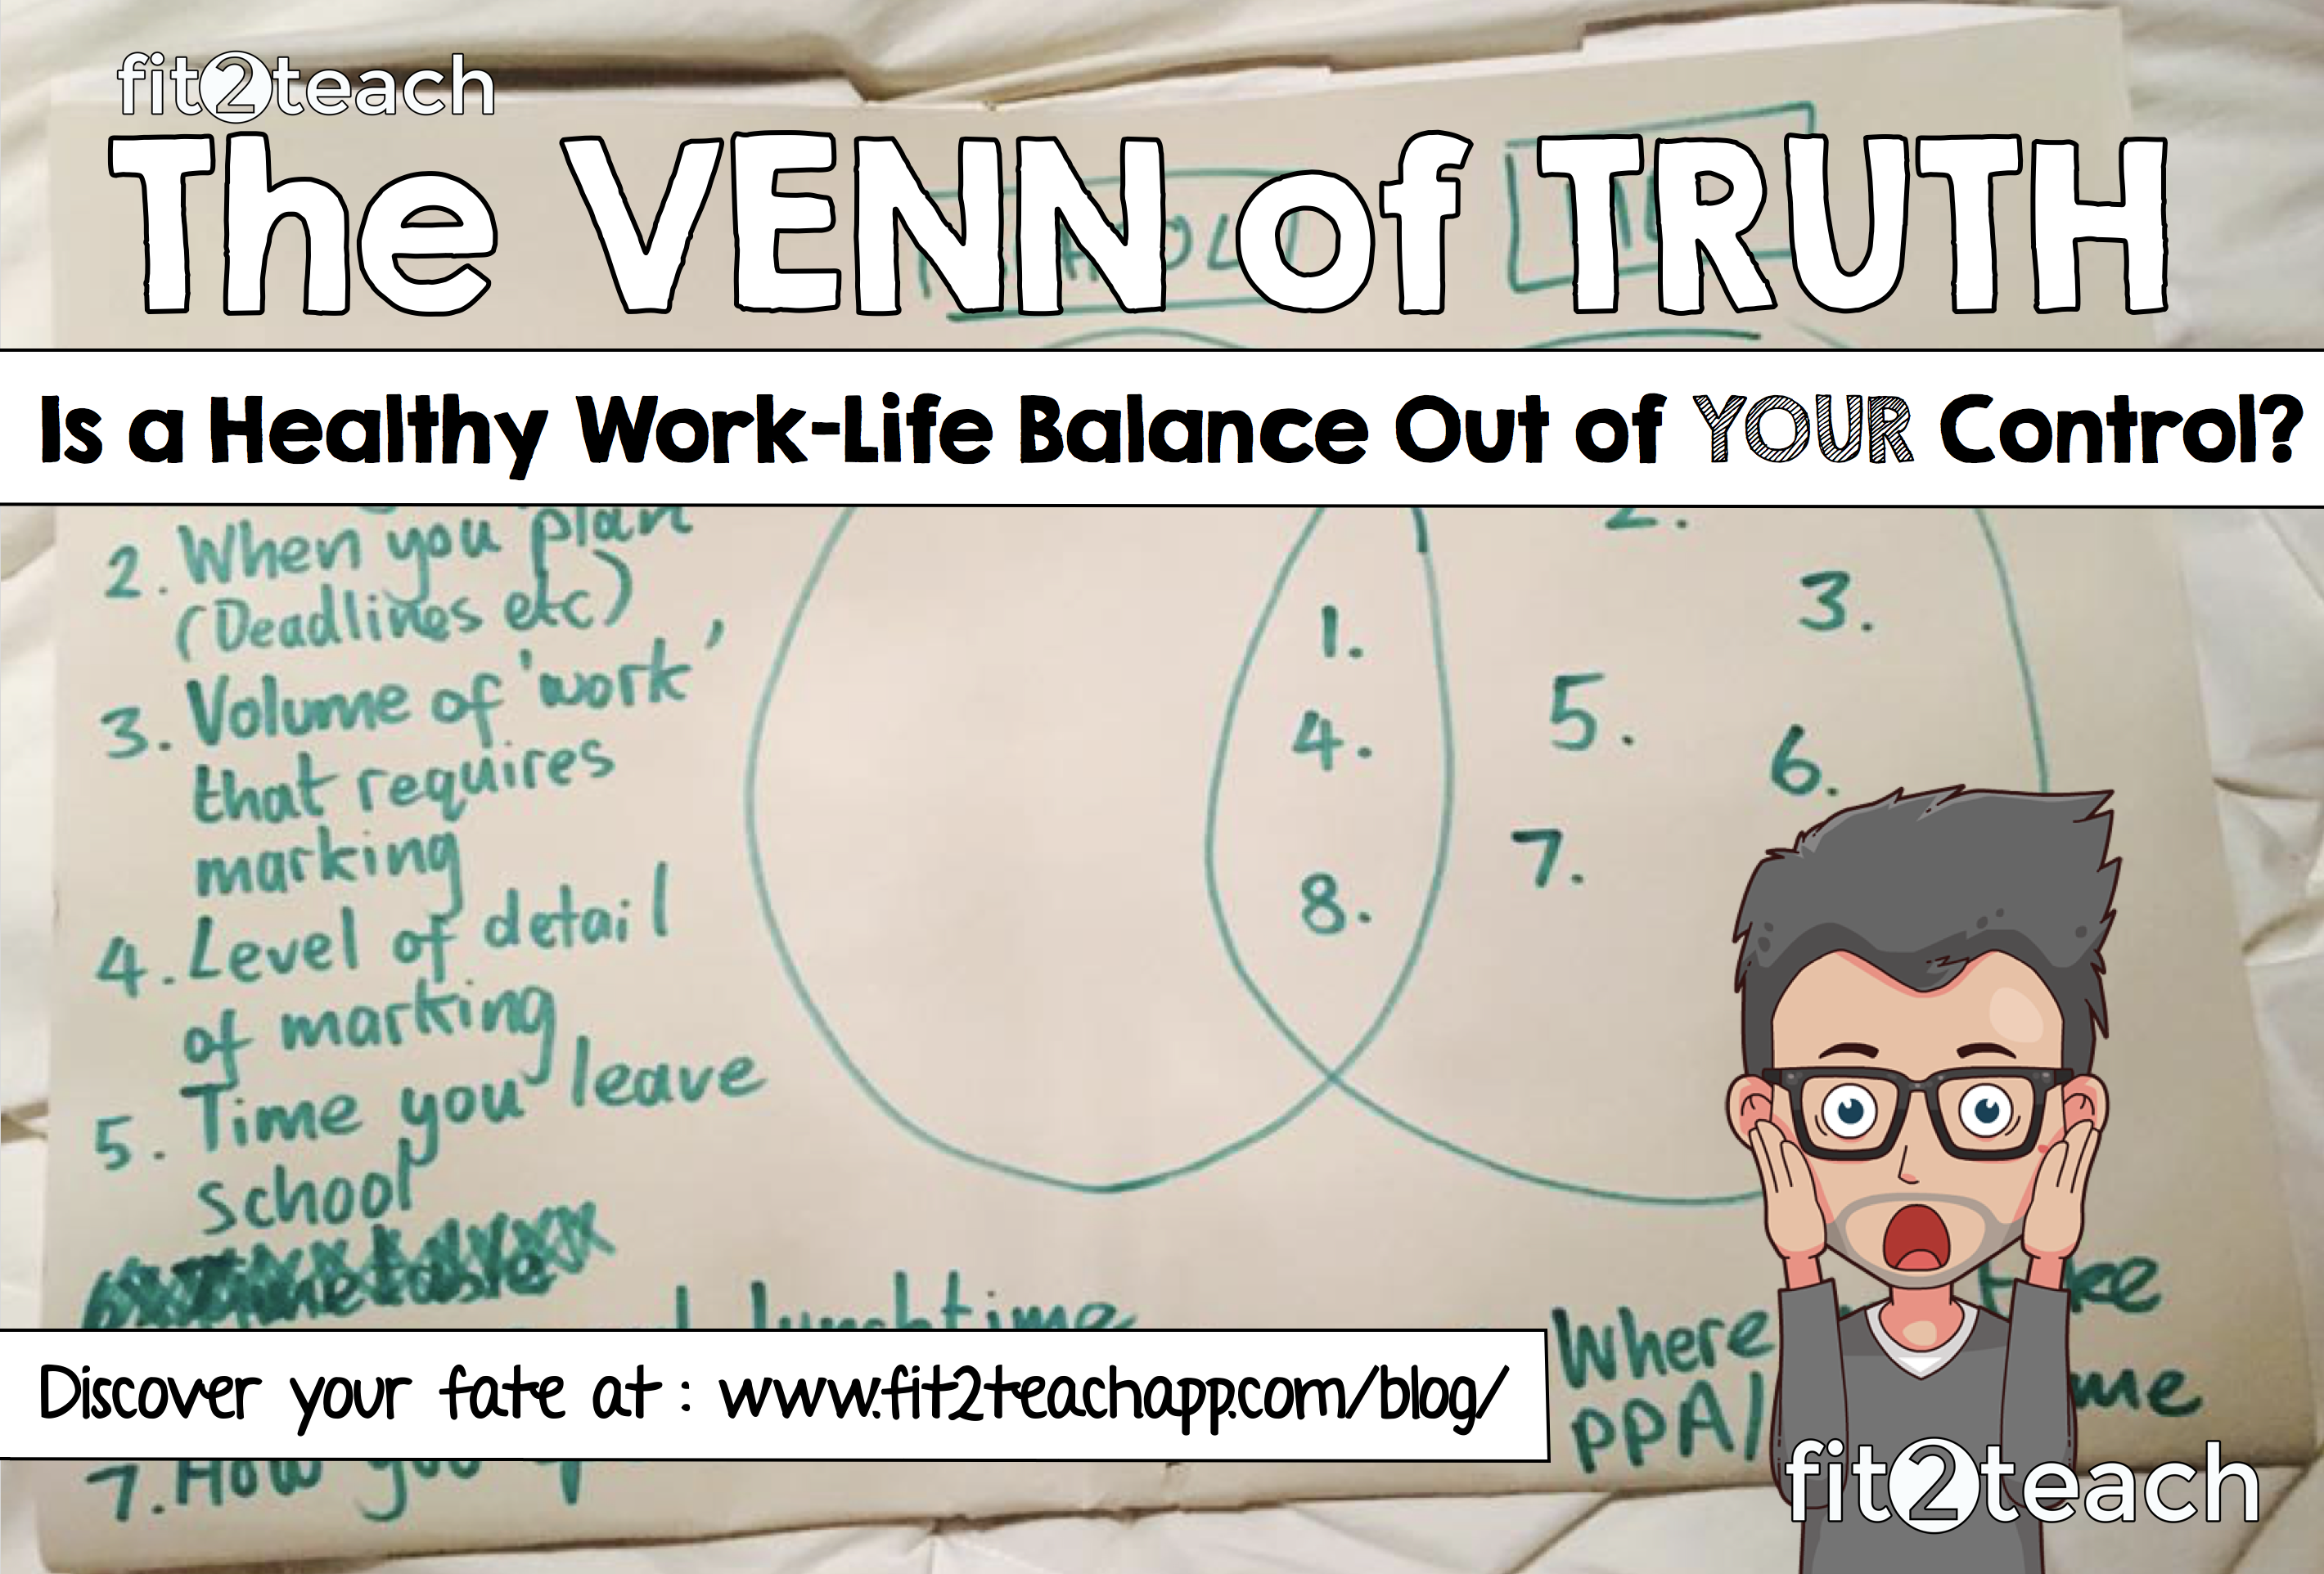 Is a Healthy Work-Life Balance Beyond your Control?